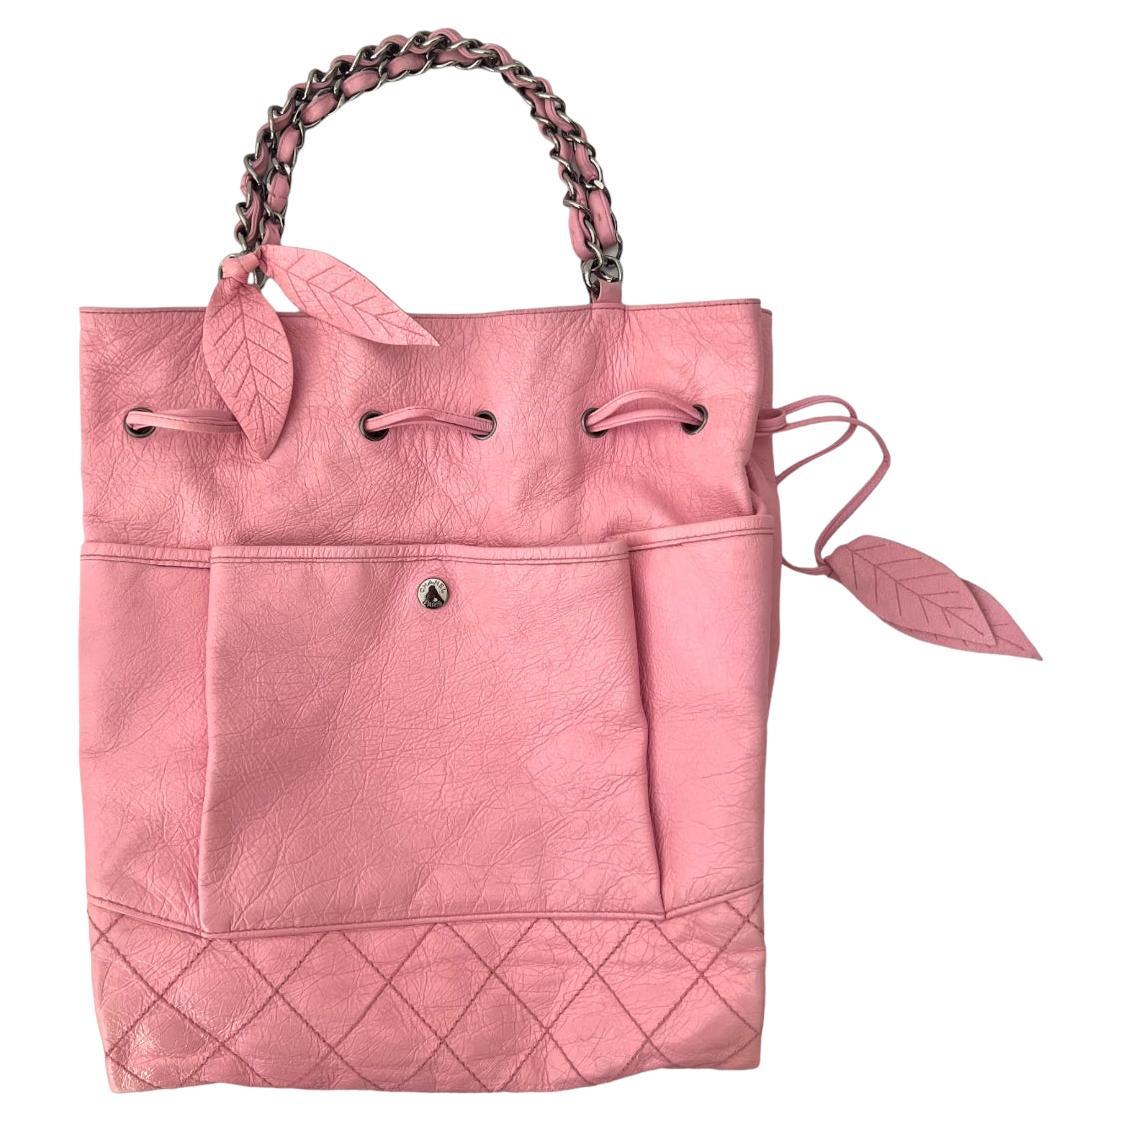 Changing Bag Pale Pink Macrocannage Technical Canvas